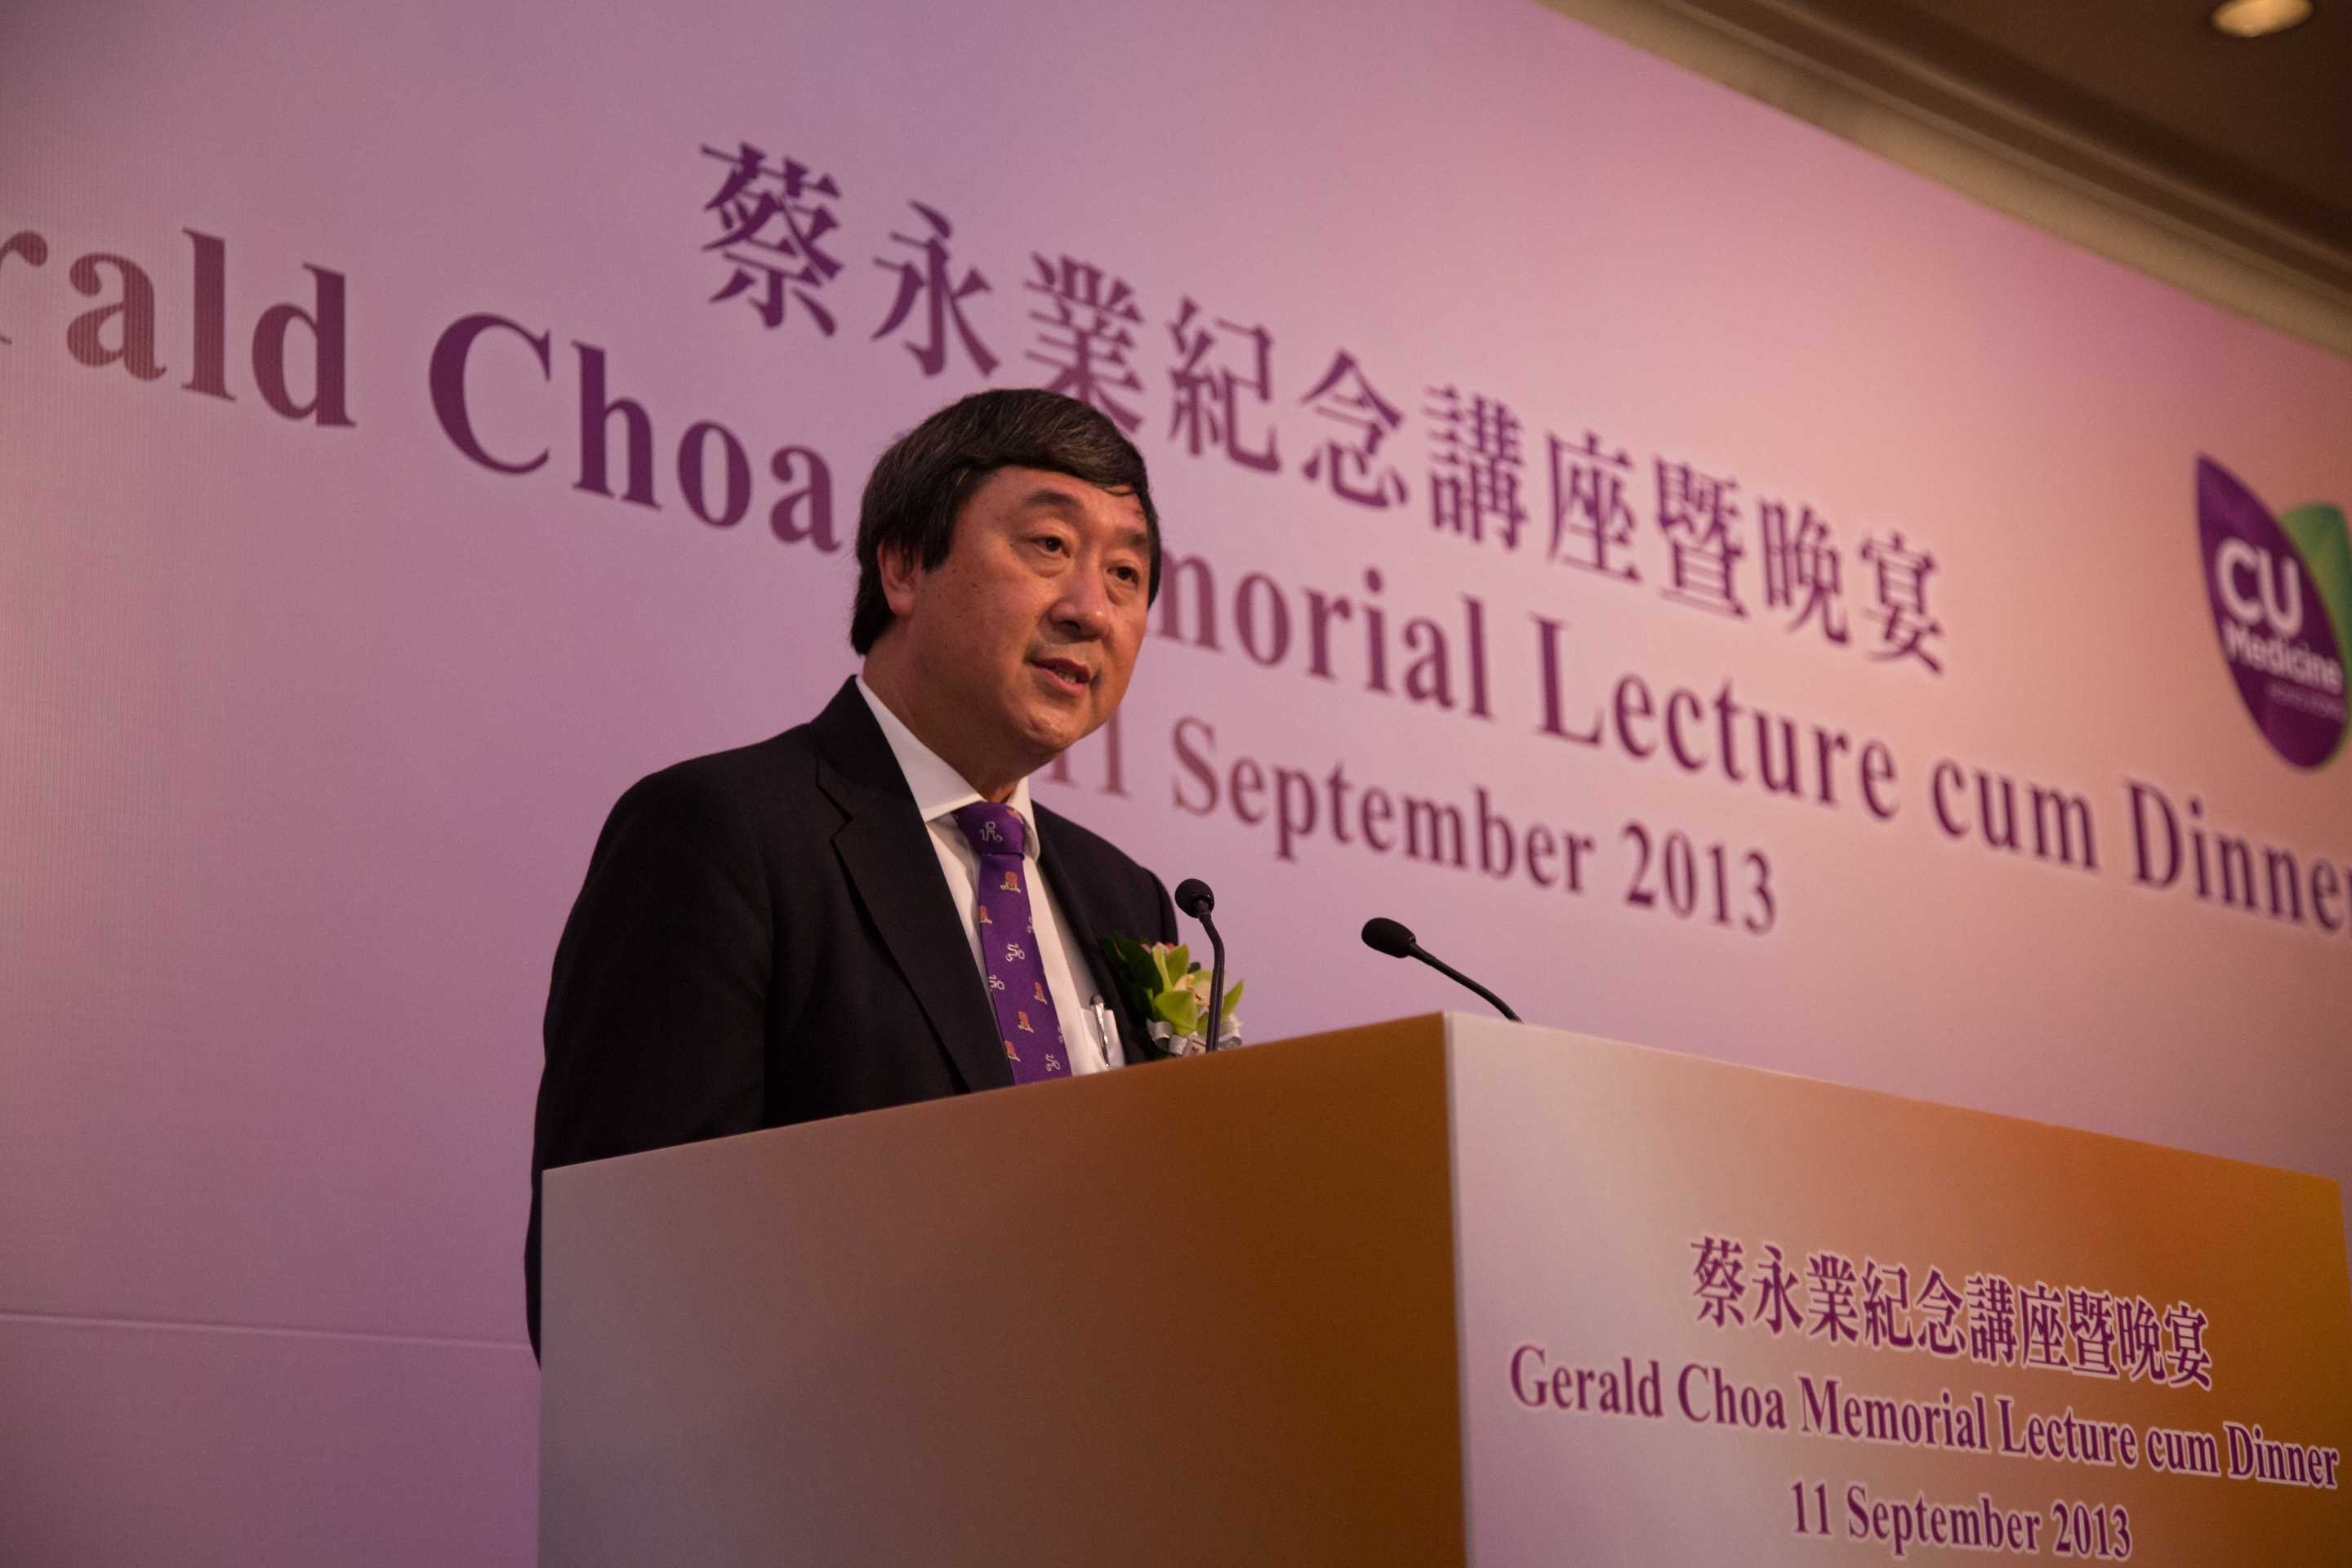 Prof. Joseph J.Y. Sung, Vice-Chancellor and President of CUHK, The Gerald Choa Memorial Lecture is set up in remembrance of Professor Choa’s monumental contributions to the Faculty of Medicine.